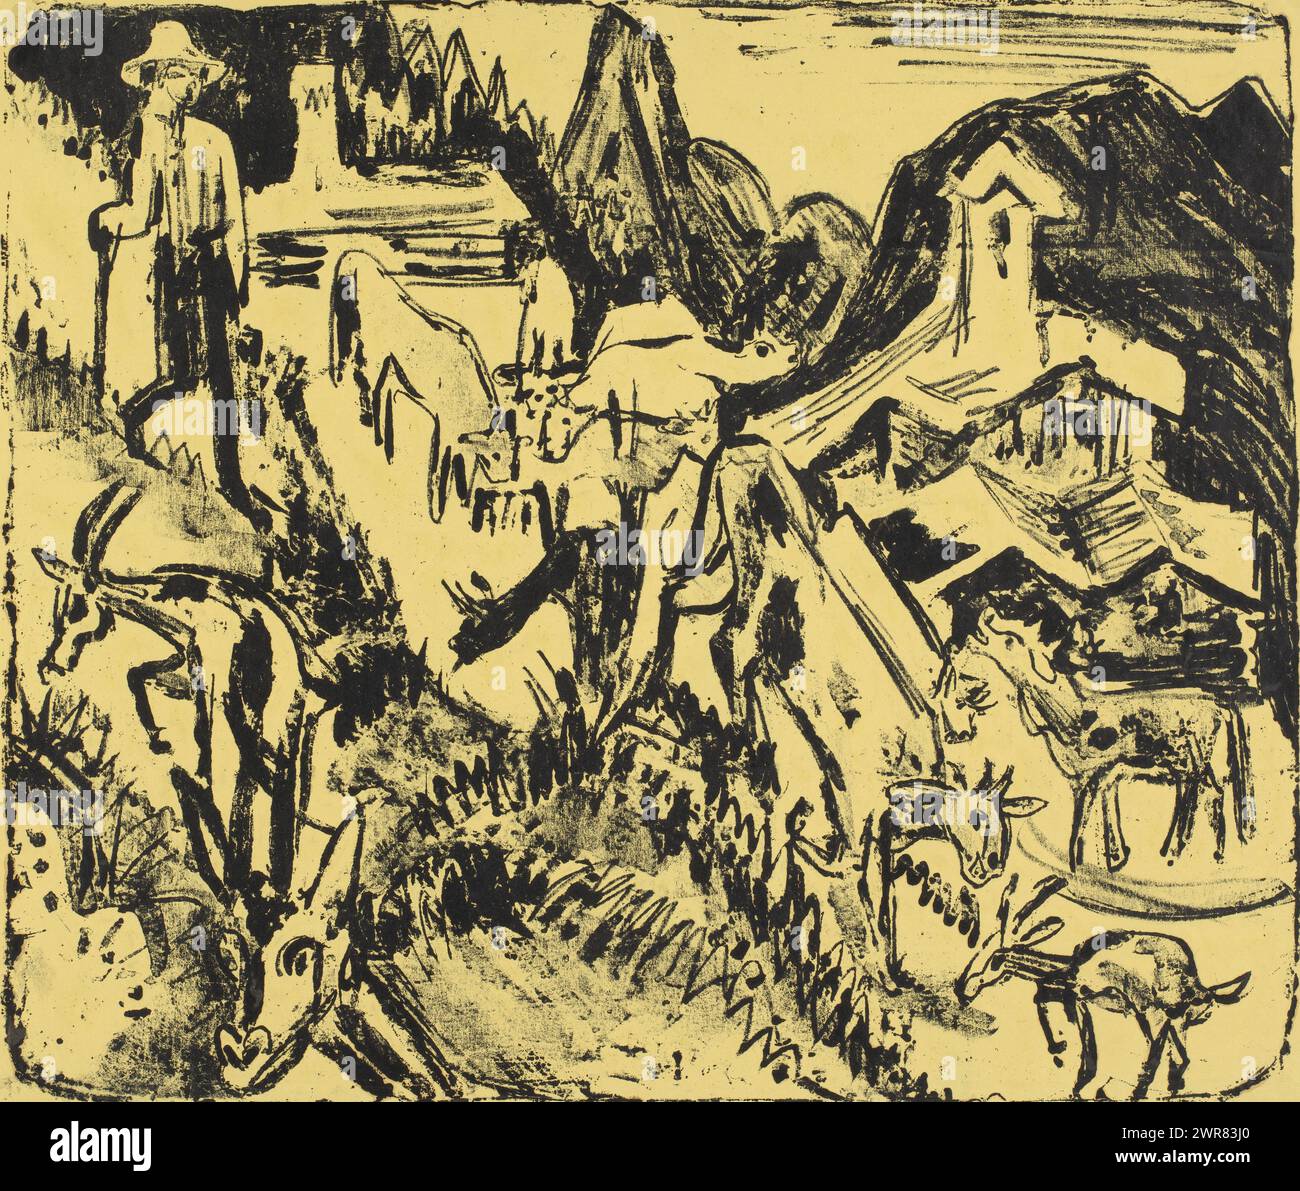 Goatherd with his herd in the mountains, in the background the Stafelalp., print maker: Ernst Ludwig Kirchner, Germany, 1890 - 1938, paper, height 520 mm × width 680 mm, print Stock Photo